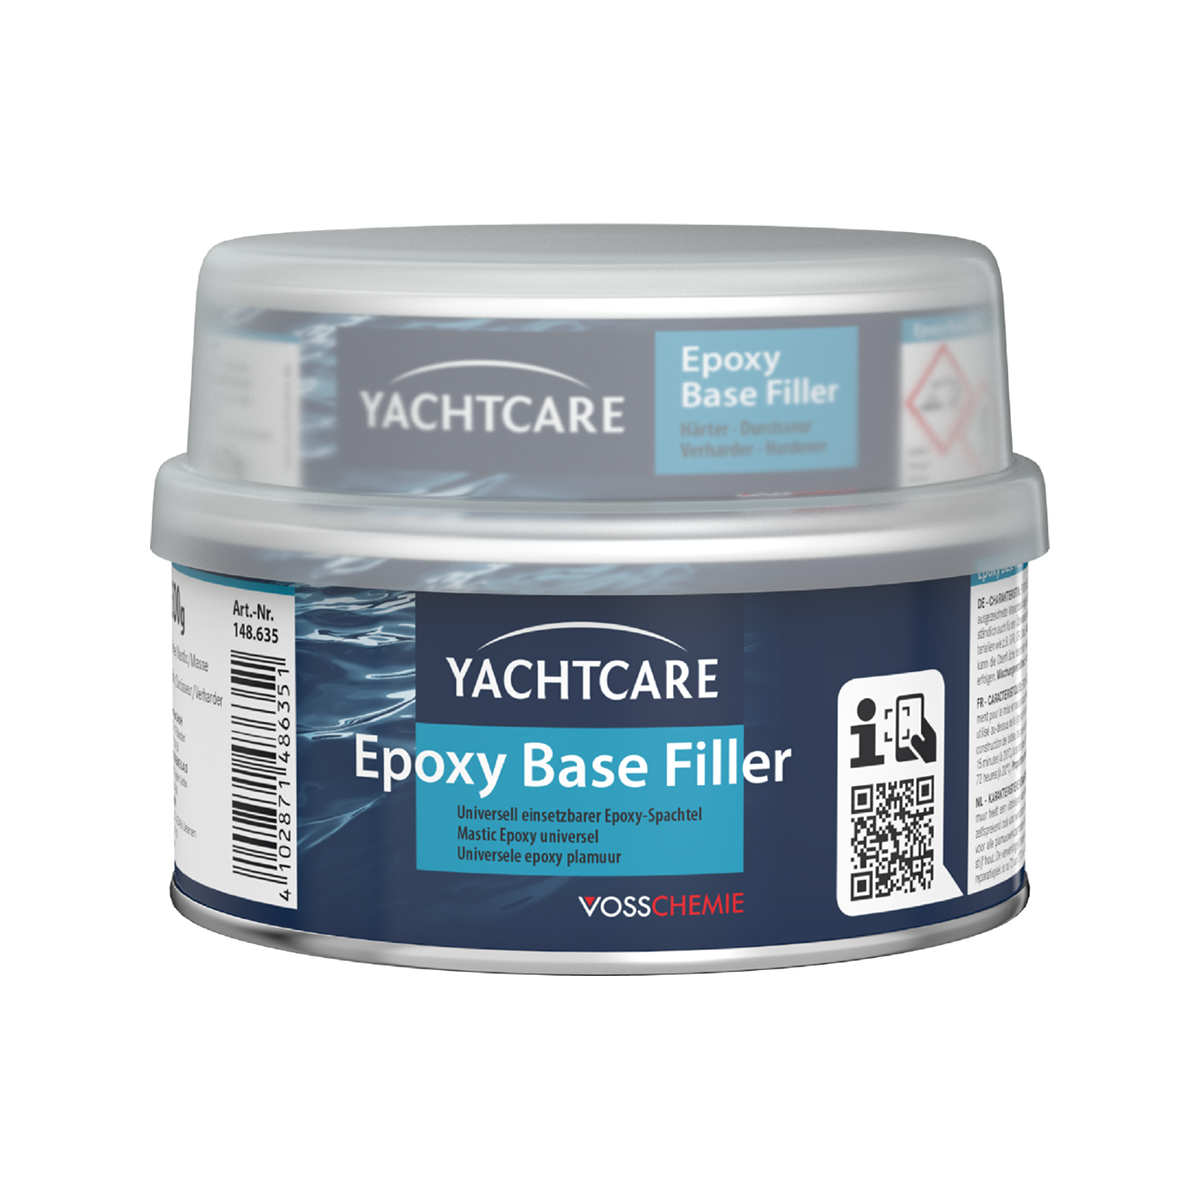 Yachtcare Epoxy Base Filller mastic gris clair - 500g